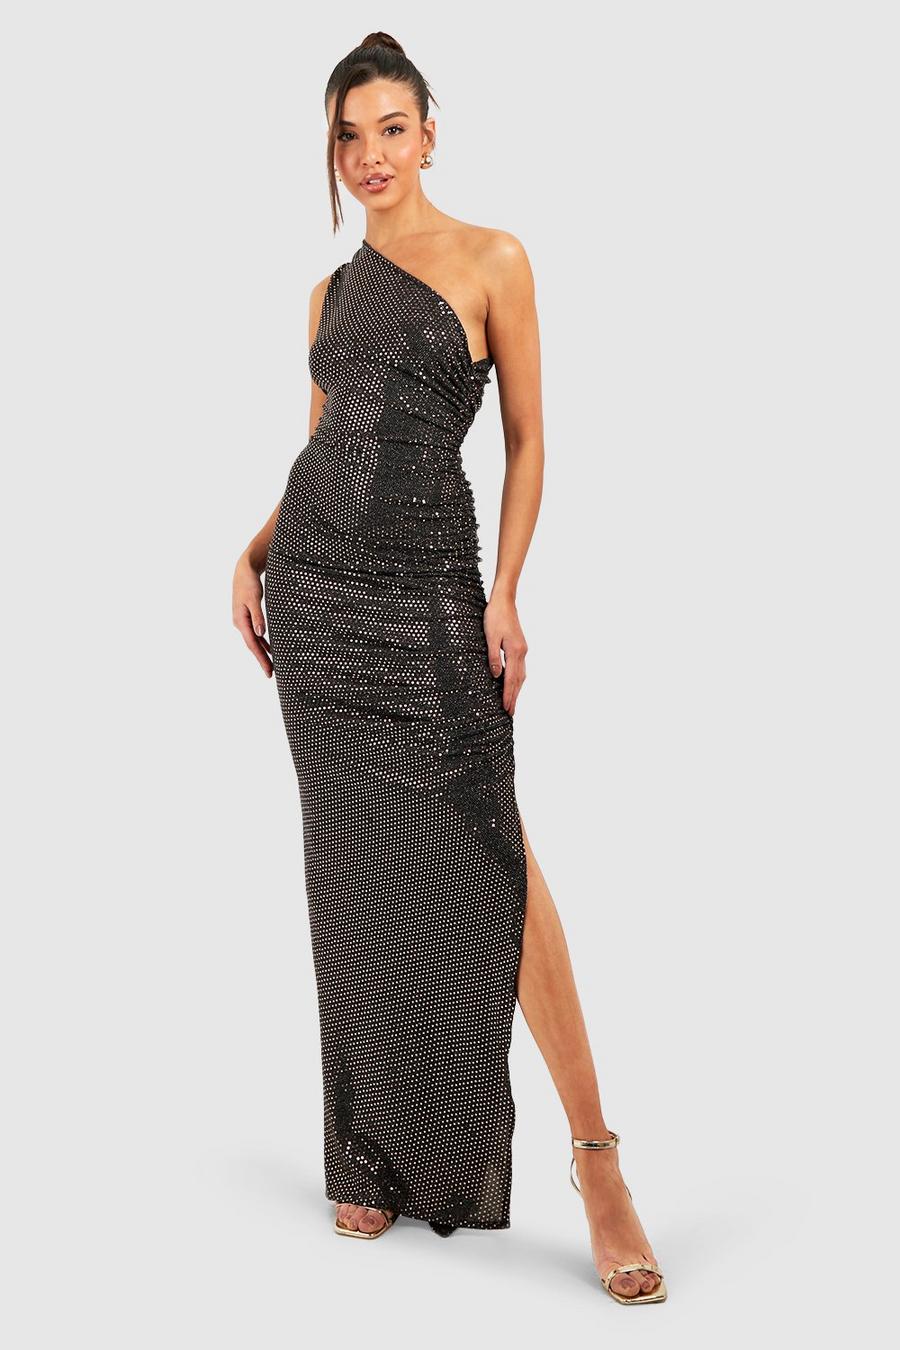 Rose gold metallic Sequin Asymmetric Rouched Maxi Dress